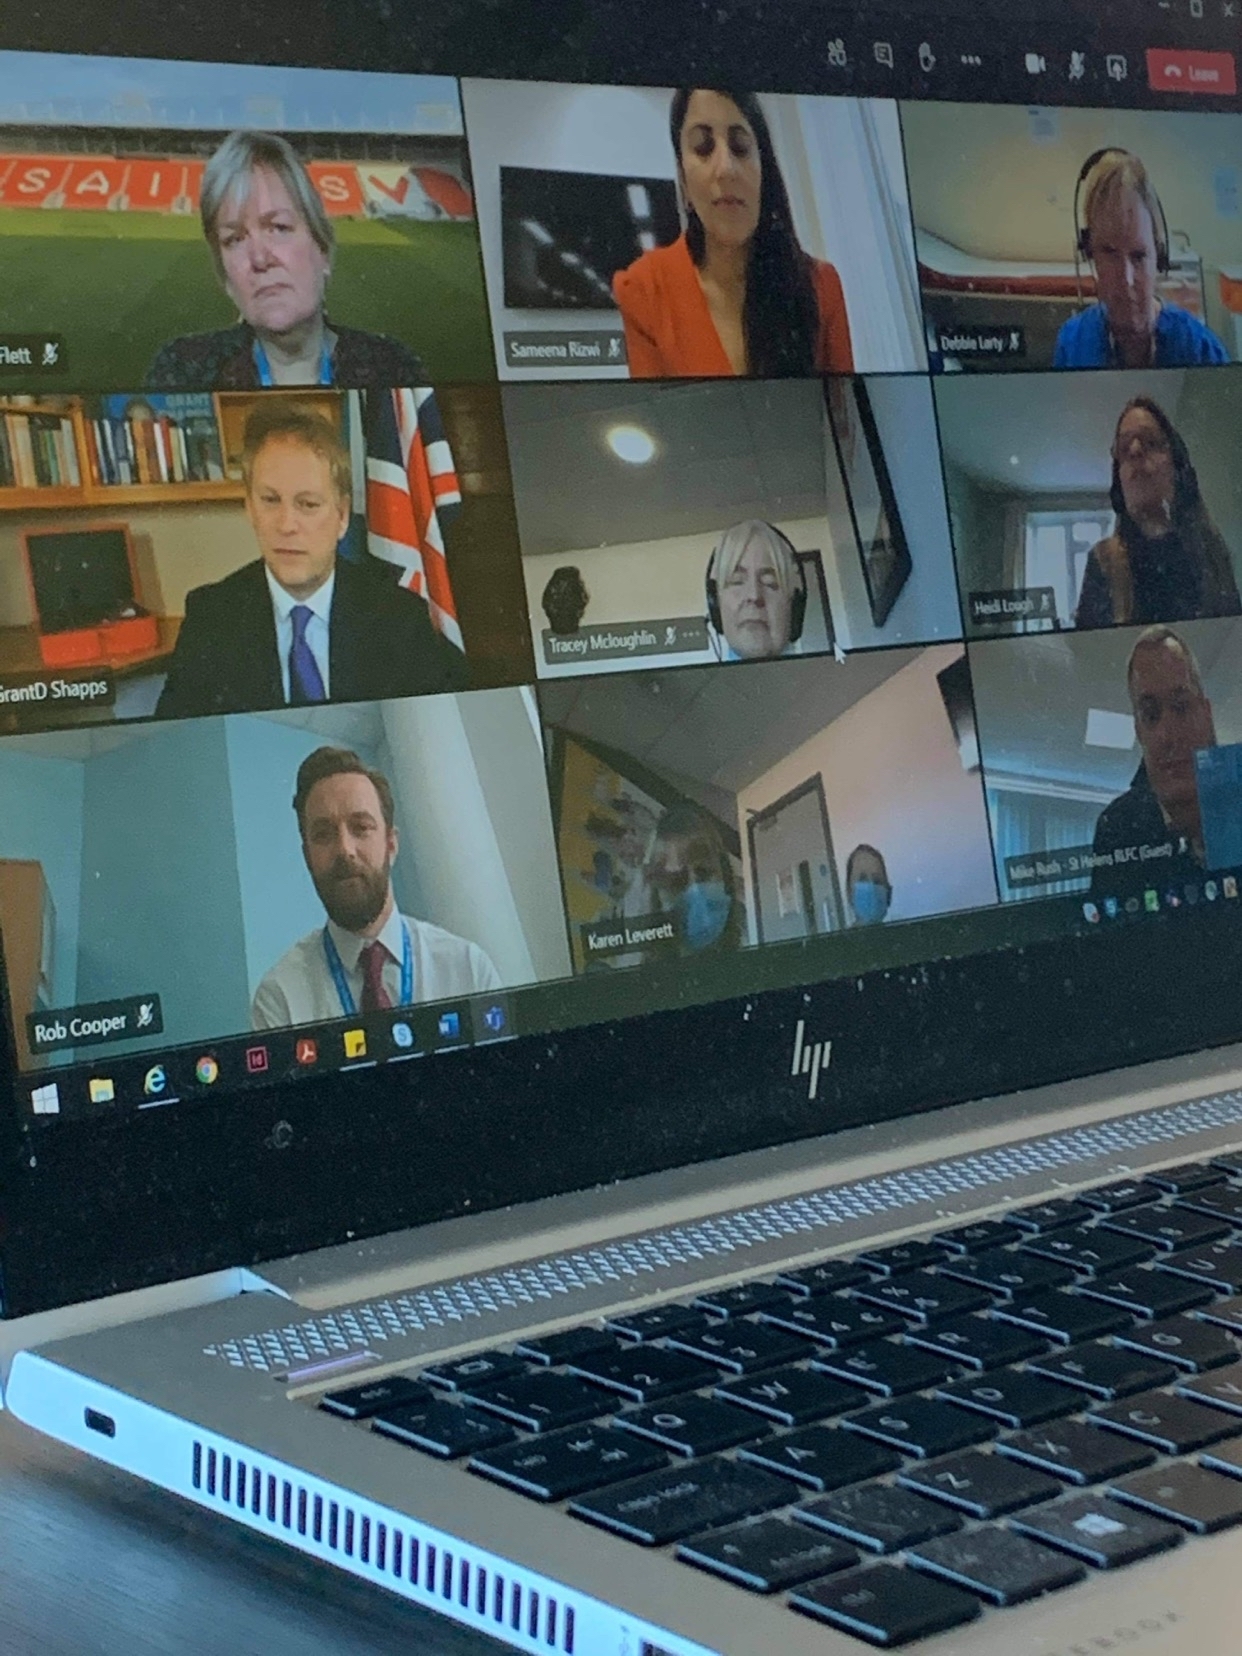 The team met with Grant Shapps in a video call on Friday